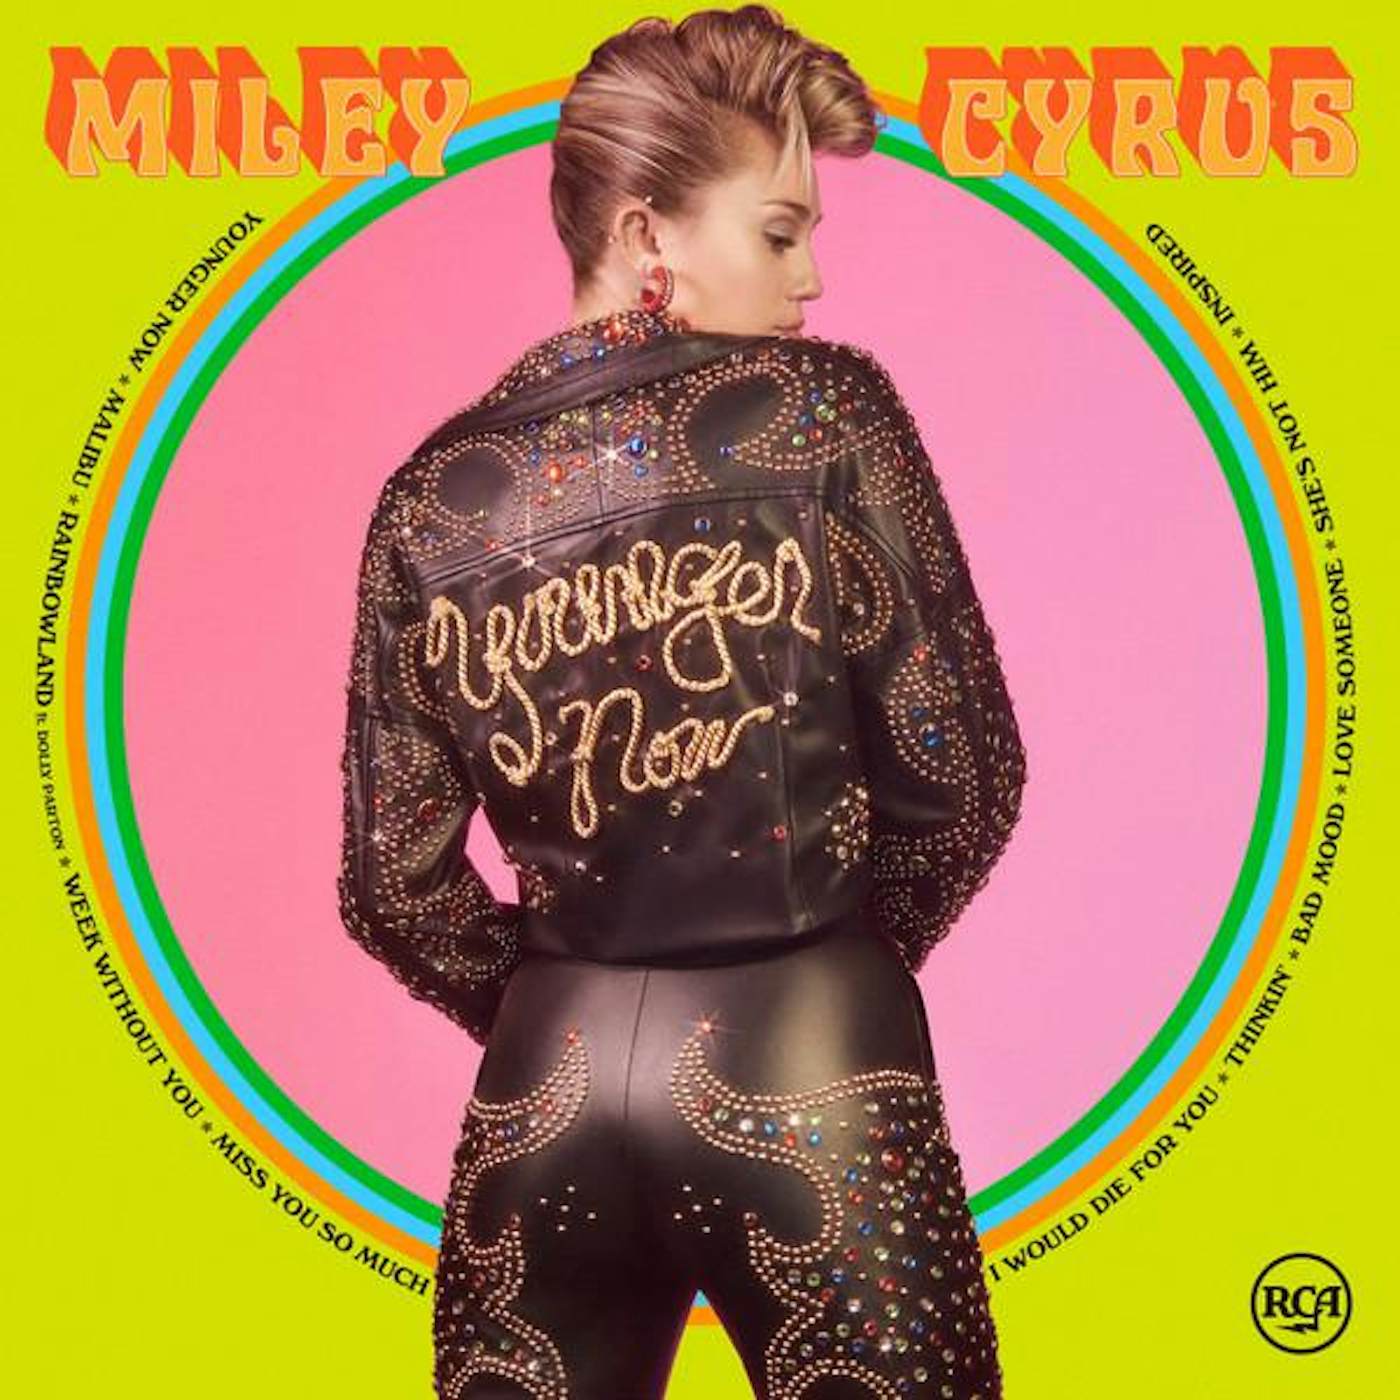 Miley Cyrus YOUNGER NOW (150G VINYL/DL CARD) Vinyl Record